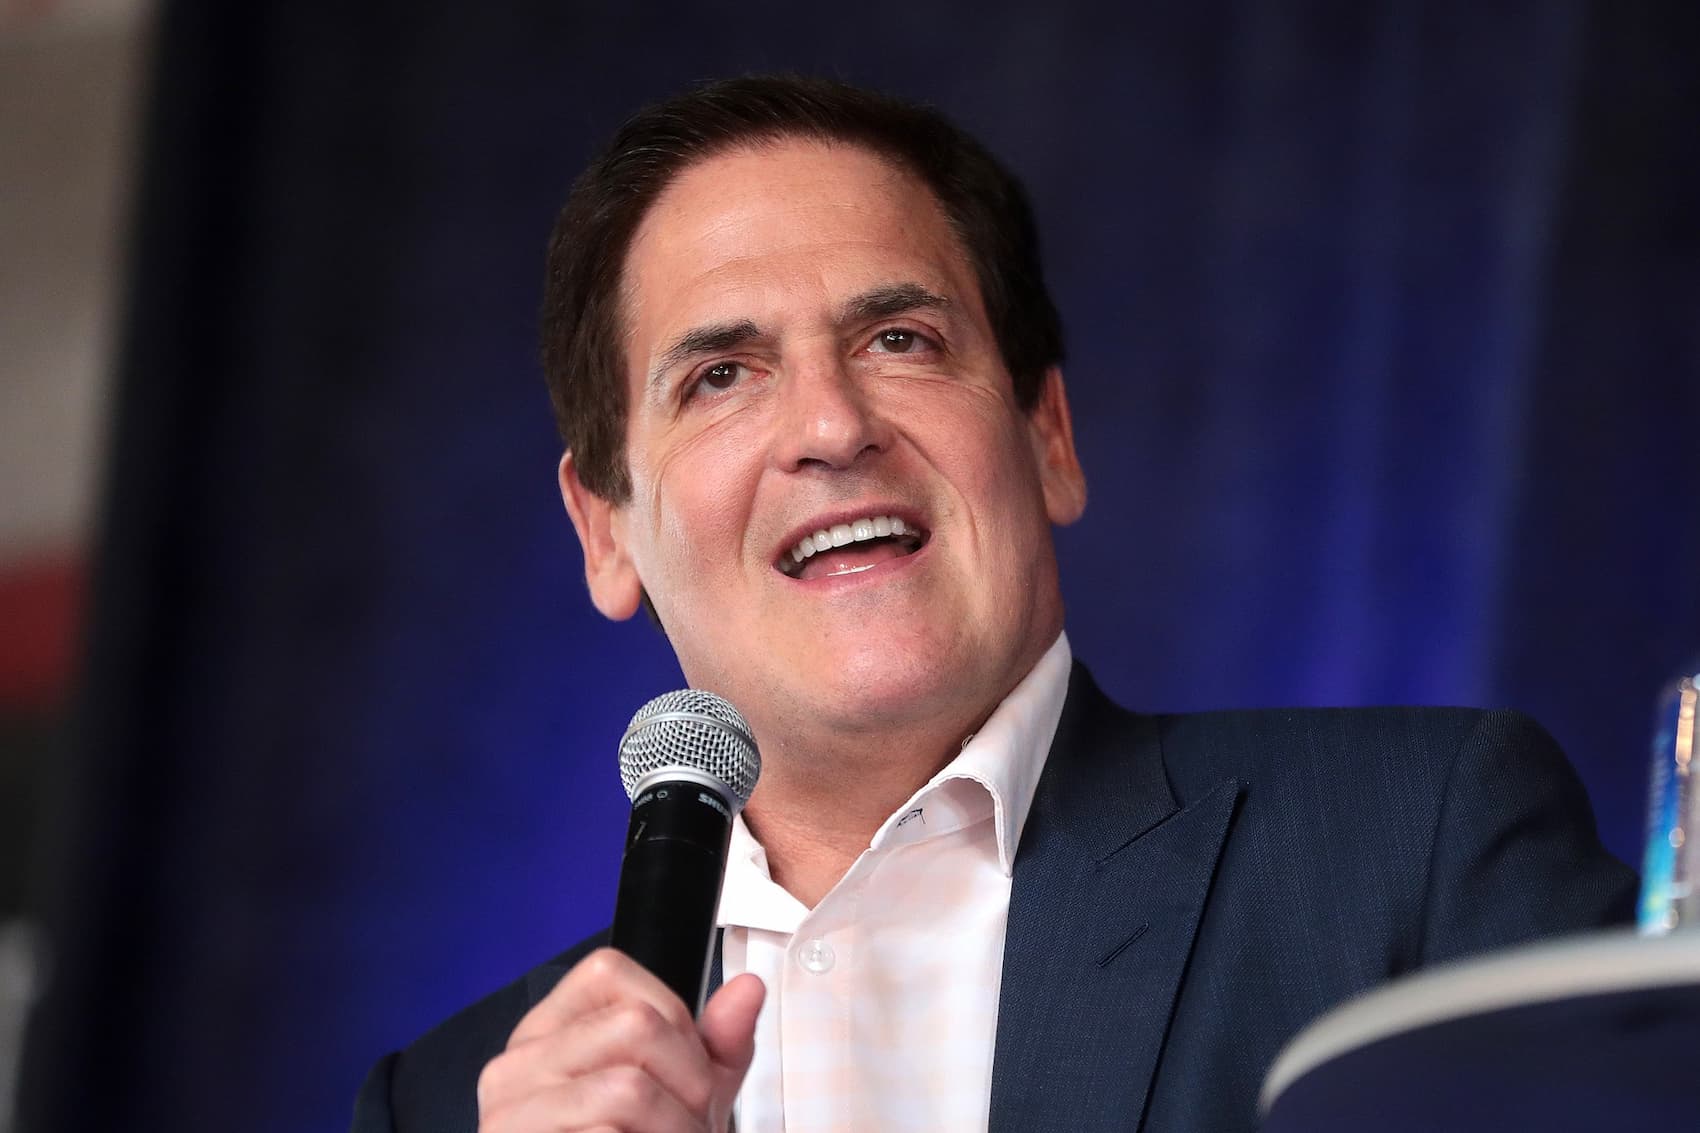 Mark Cuban’s New Online Pharmacy Aimed at Curbing Drug Pricing